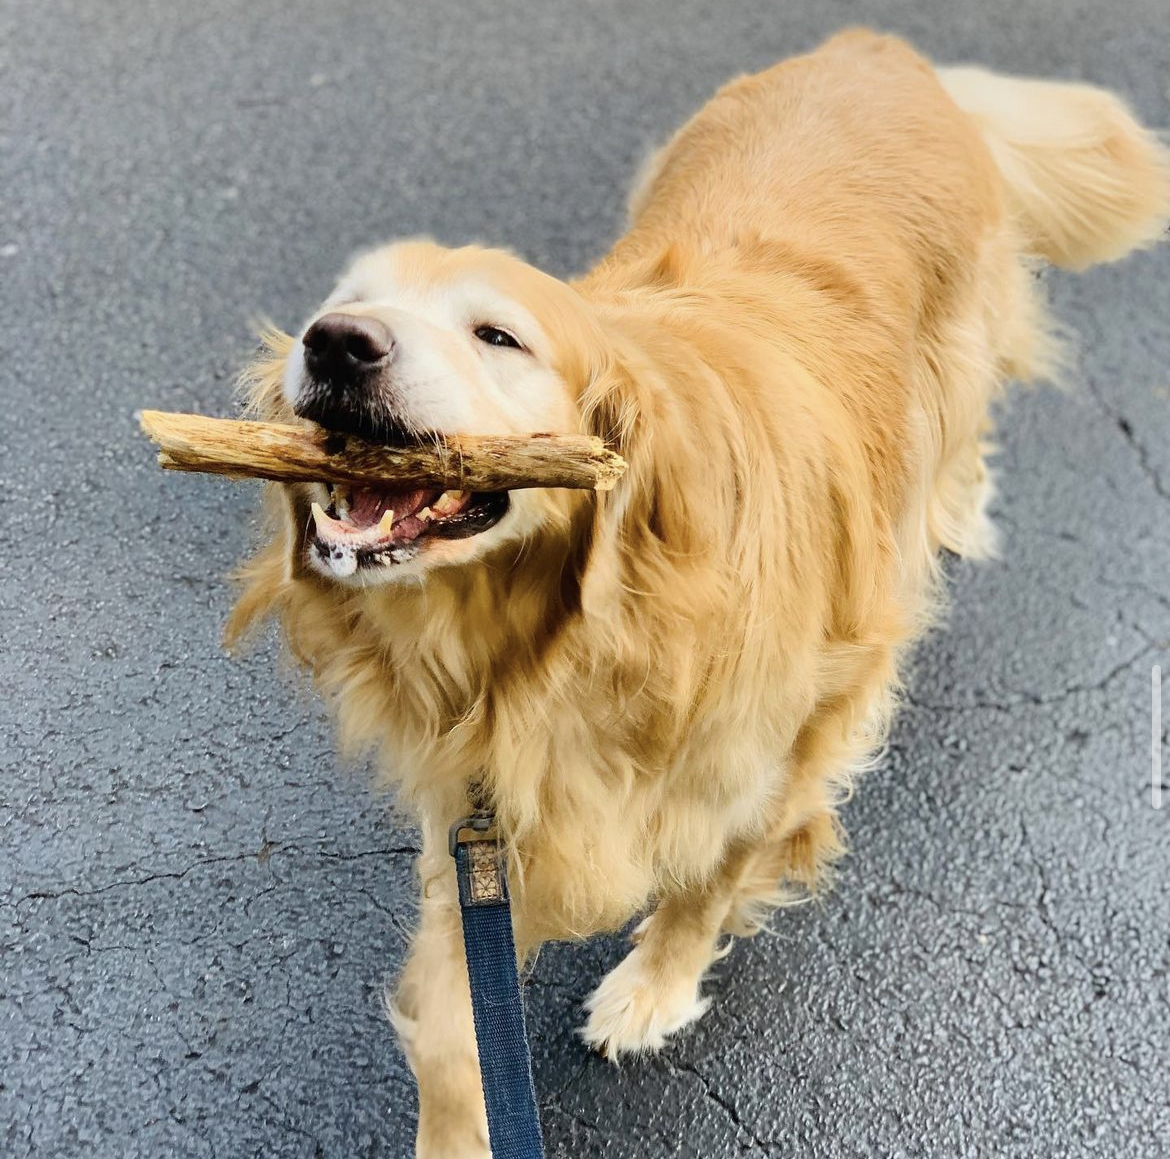 Another stick being carried during a walk with our happy Golden Retriever friend.